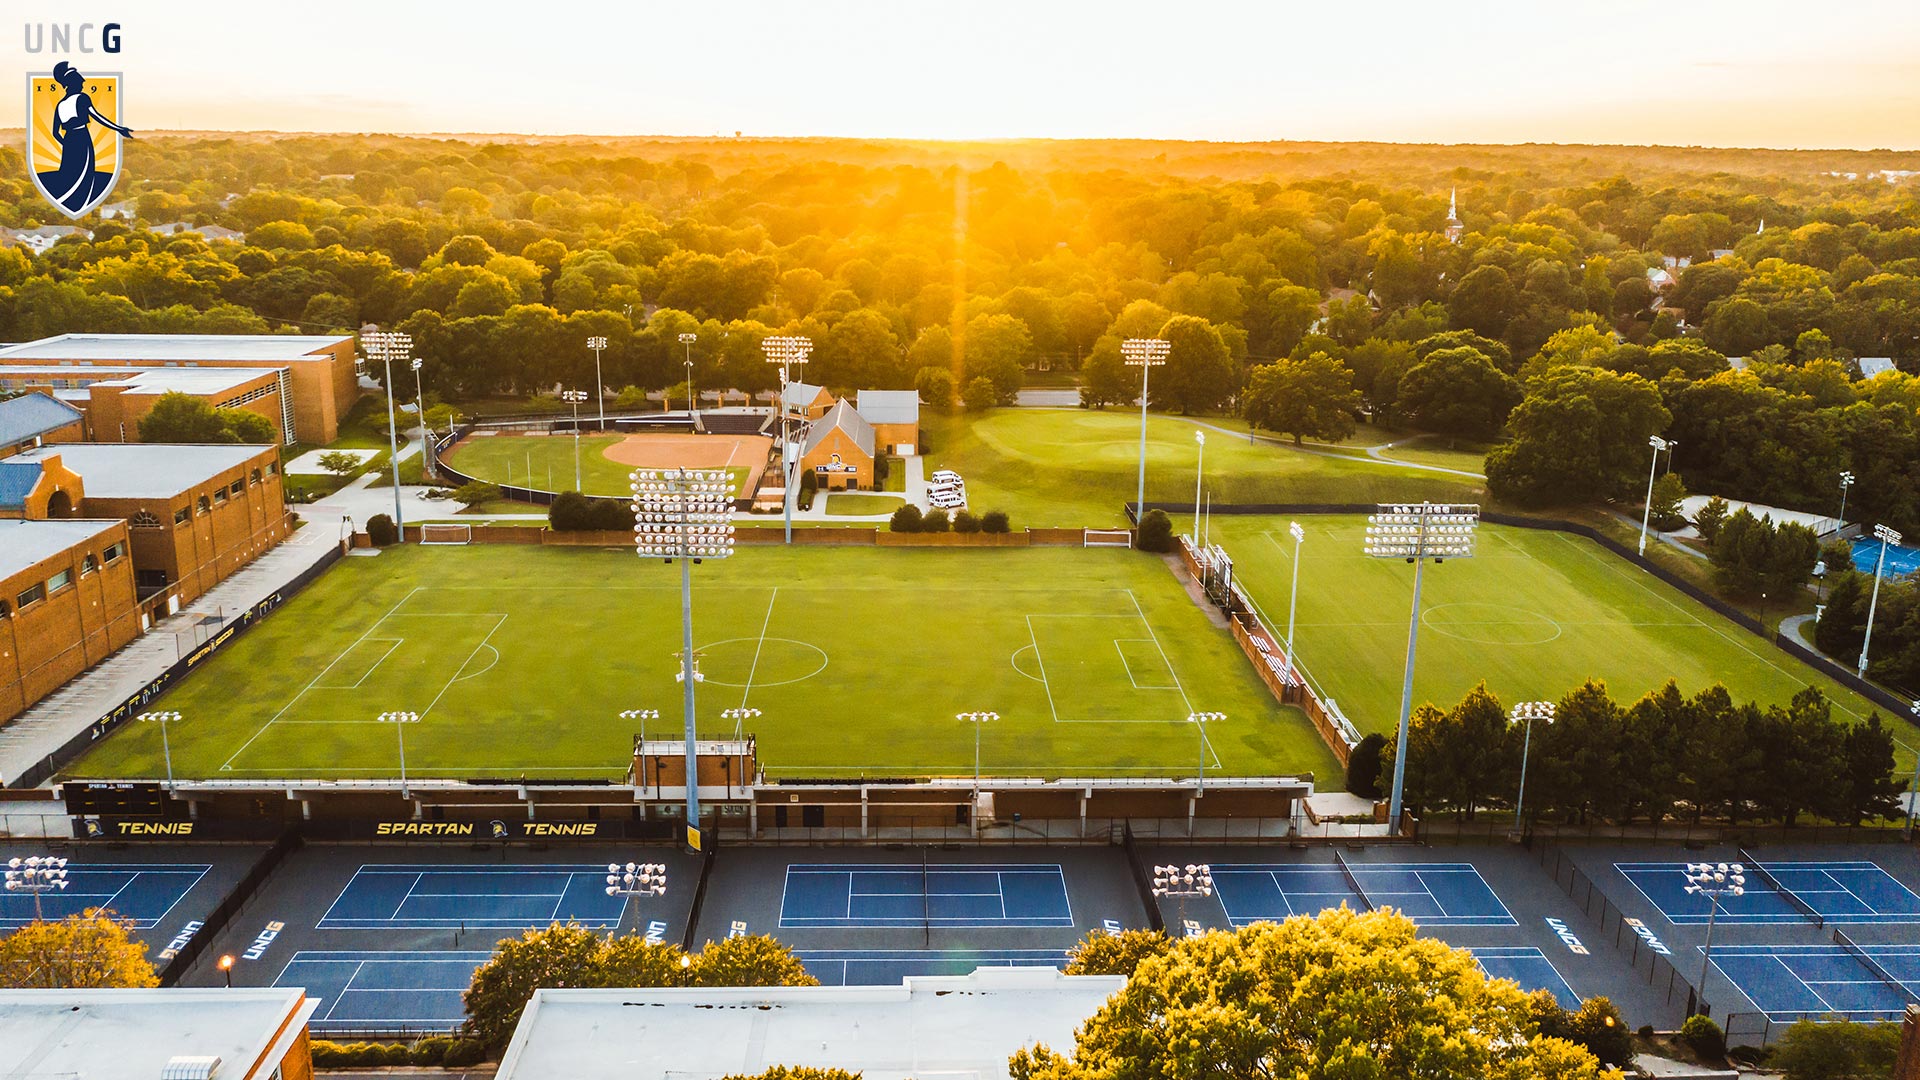 Aerial view of the UNCG Soccer field with the UNCG logo in the top left corner